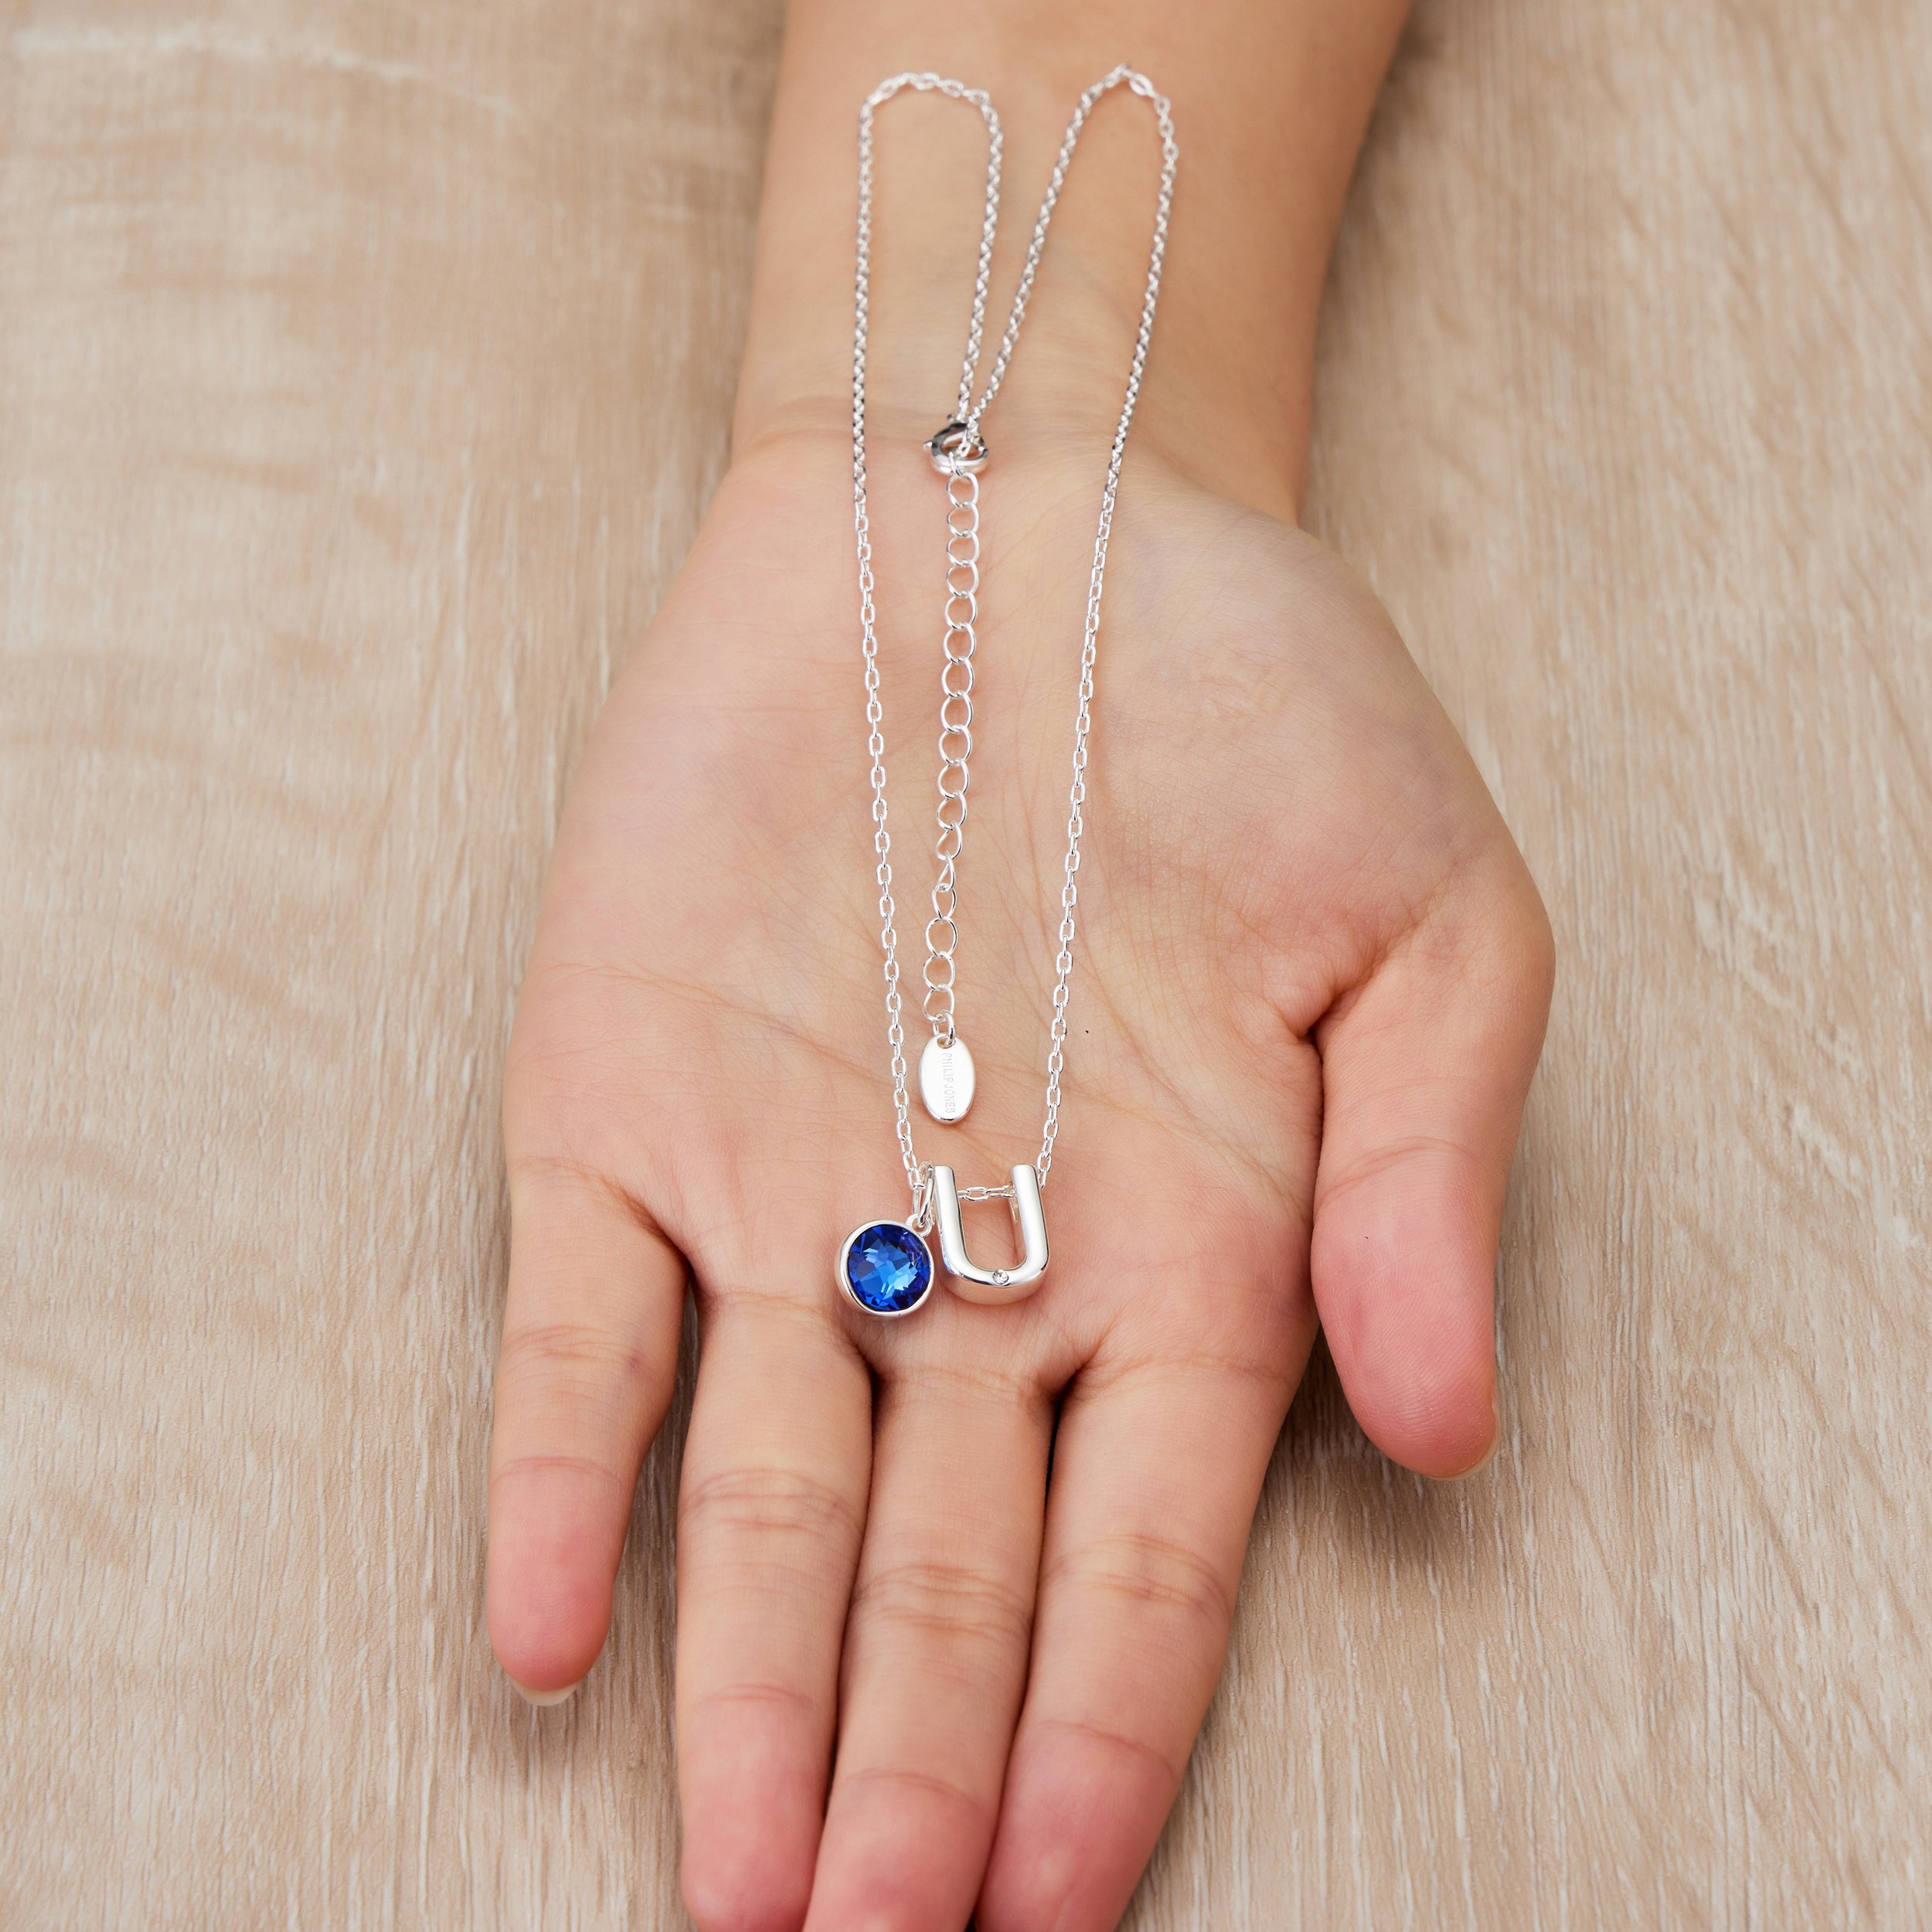 Initial U Necklace with Birthstone Charm Created with Zircondia® Crystals